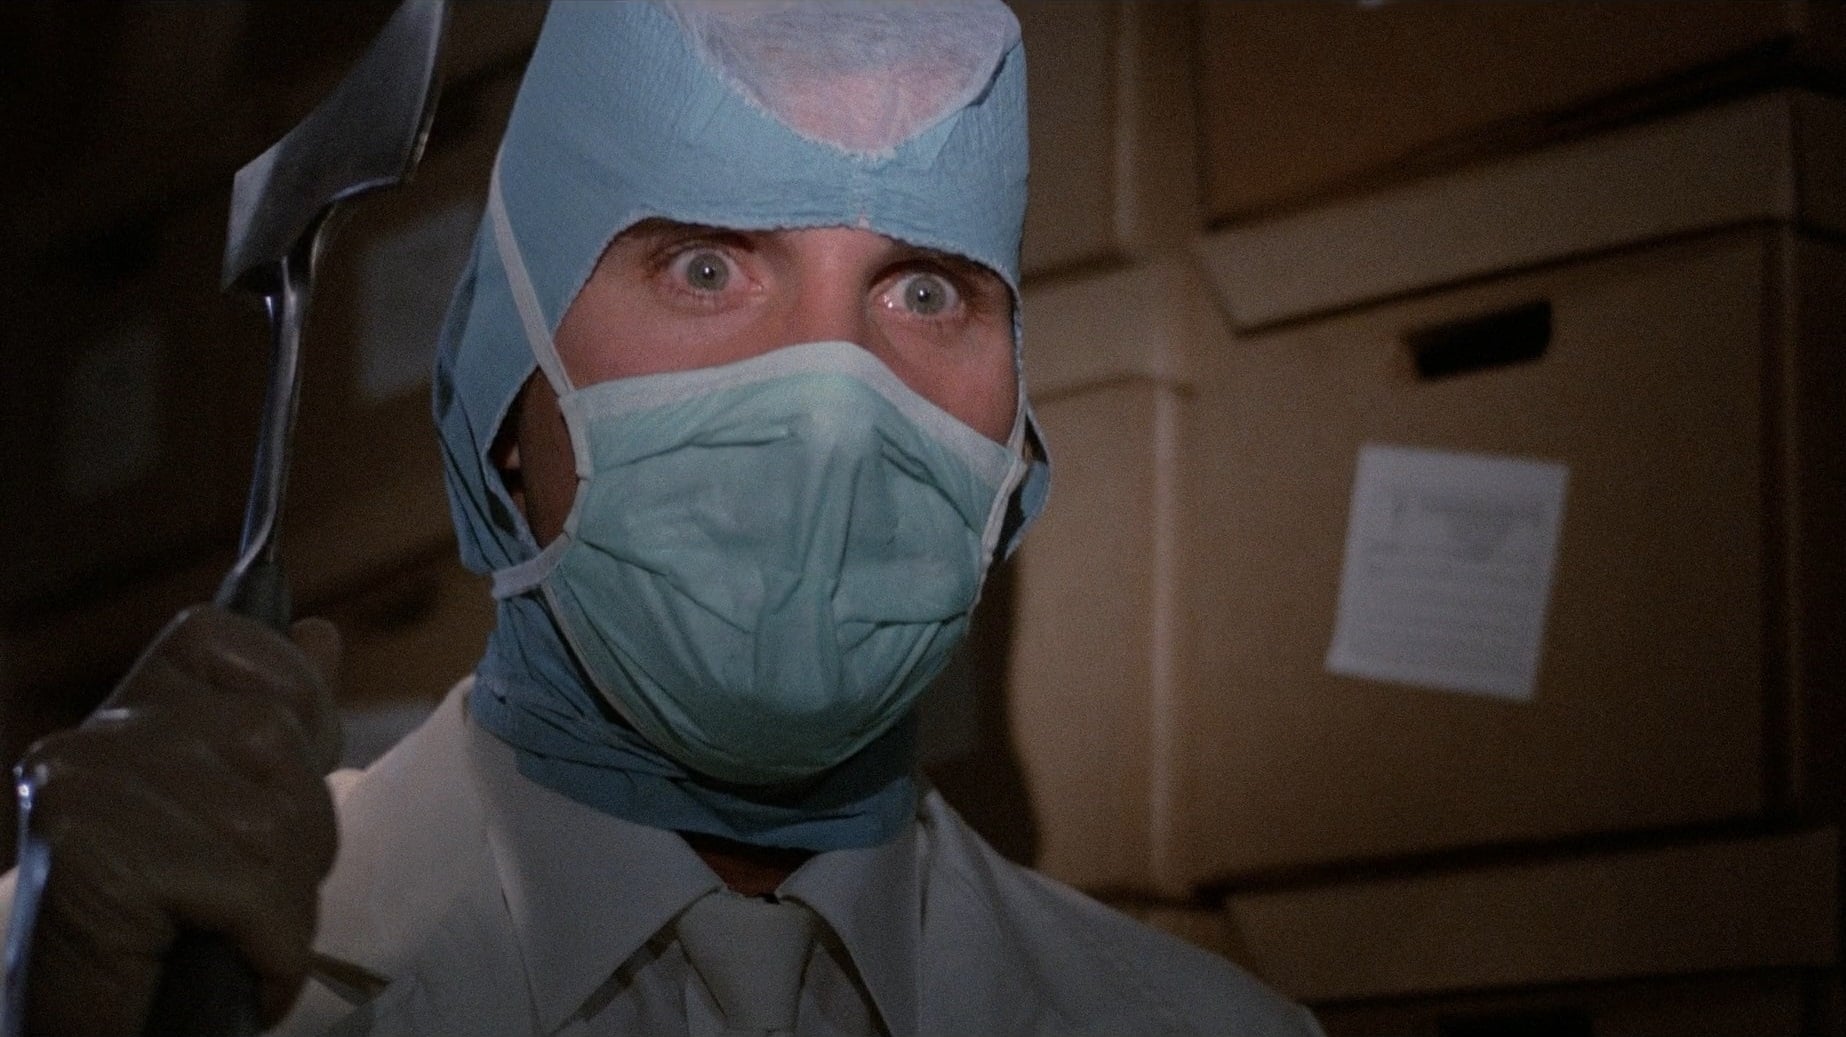 Screenshot from the film Hospital Massacre. A man wearing a doctor's uniform and surgical mask is holding a small axe. 